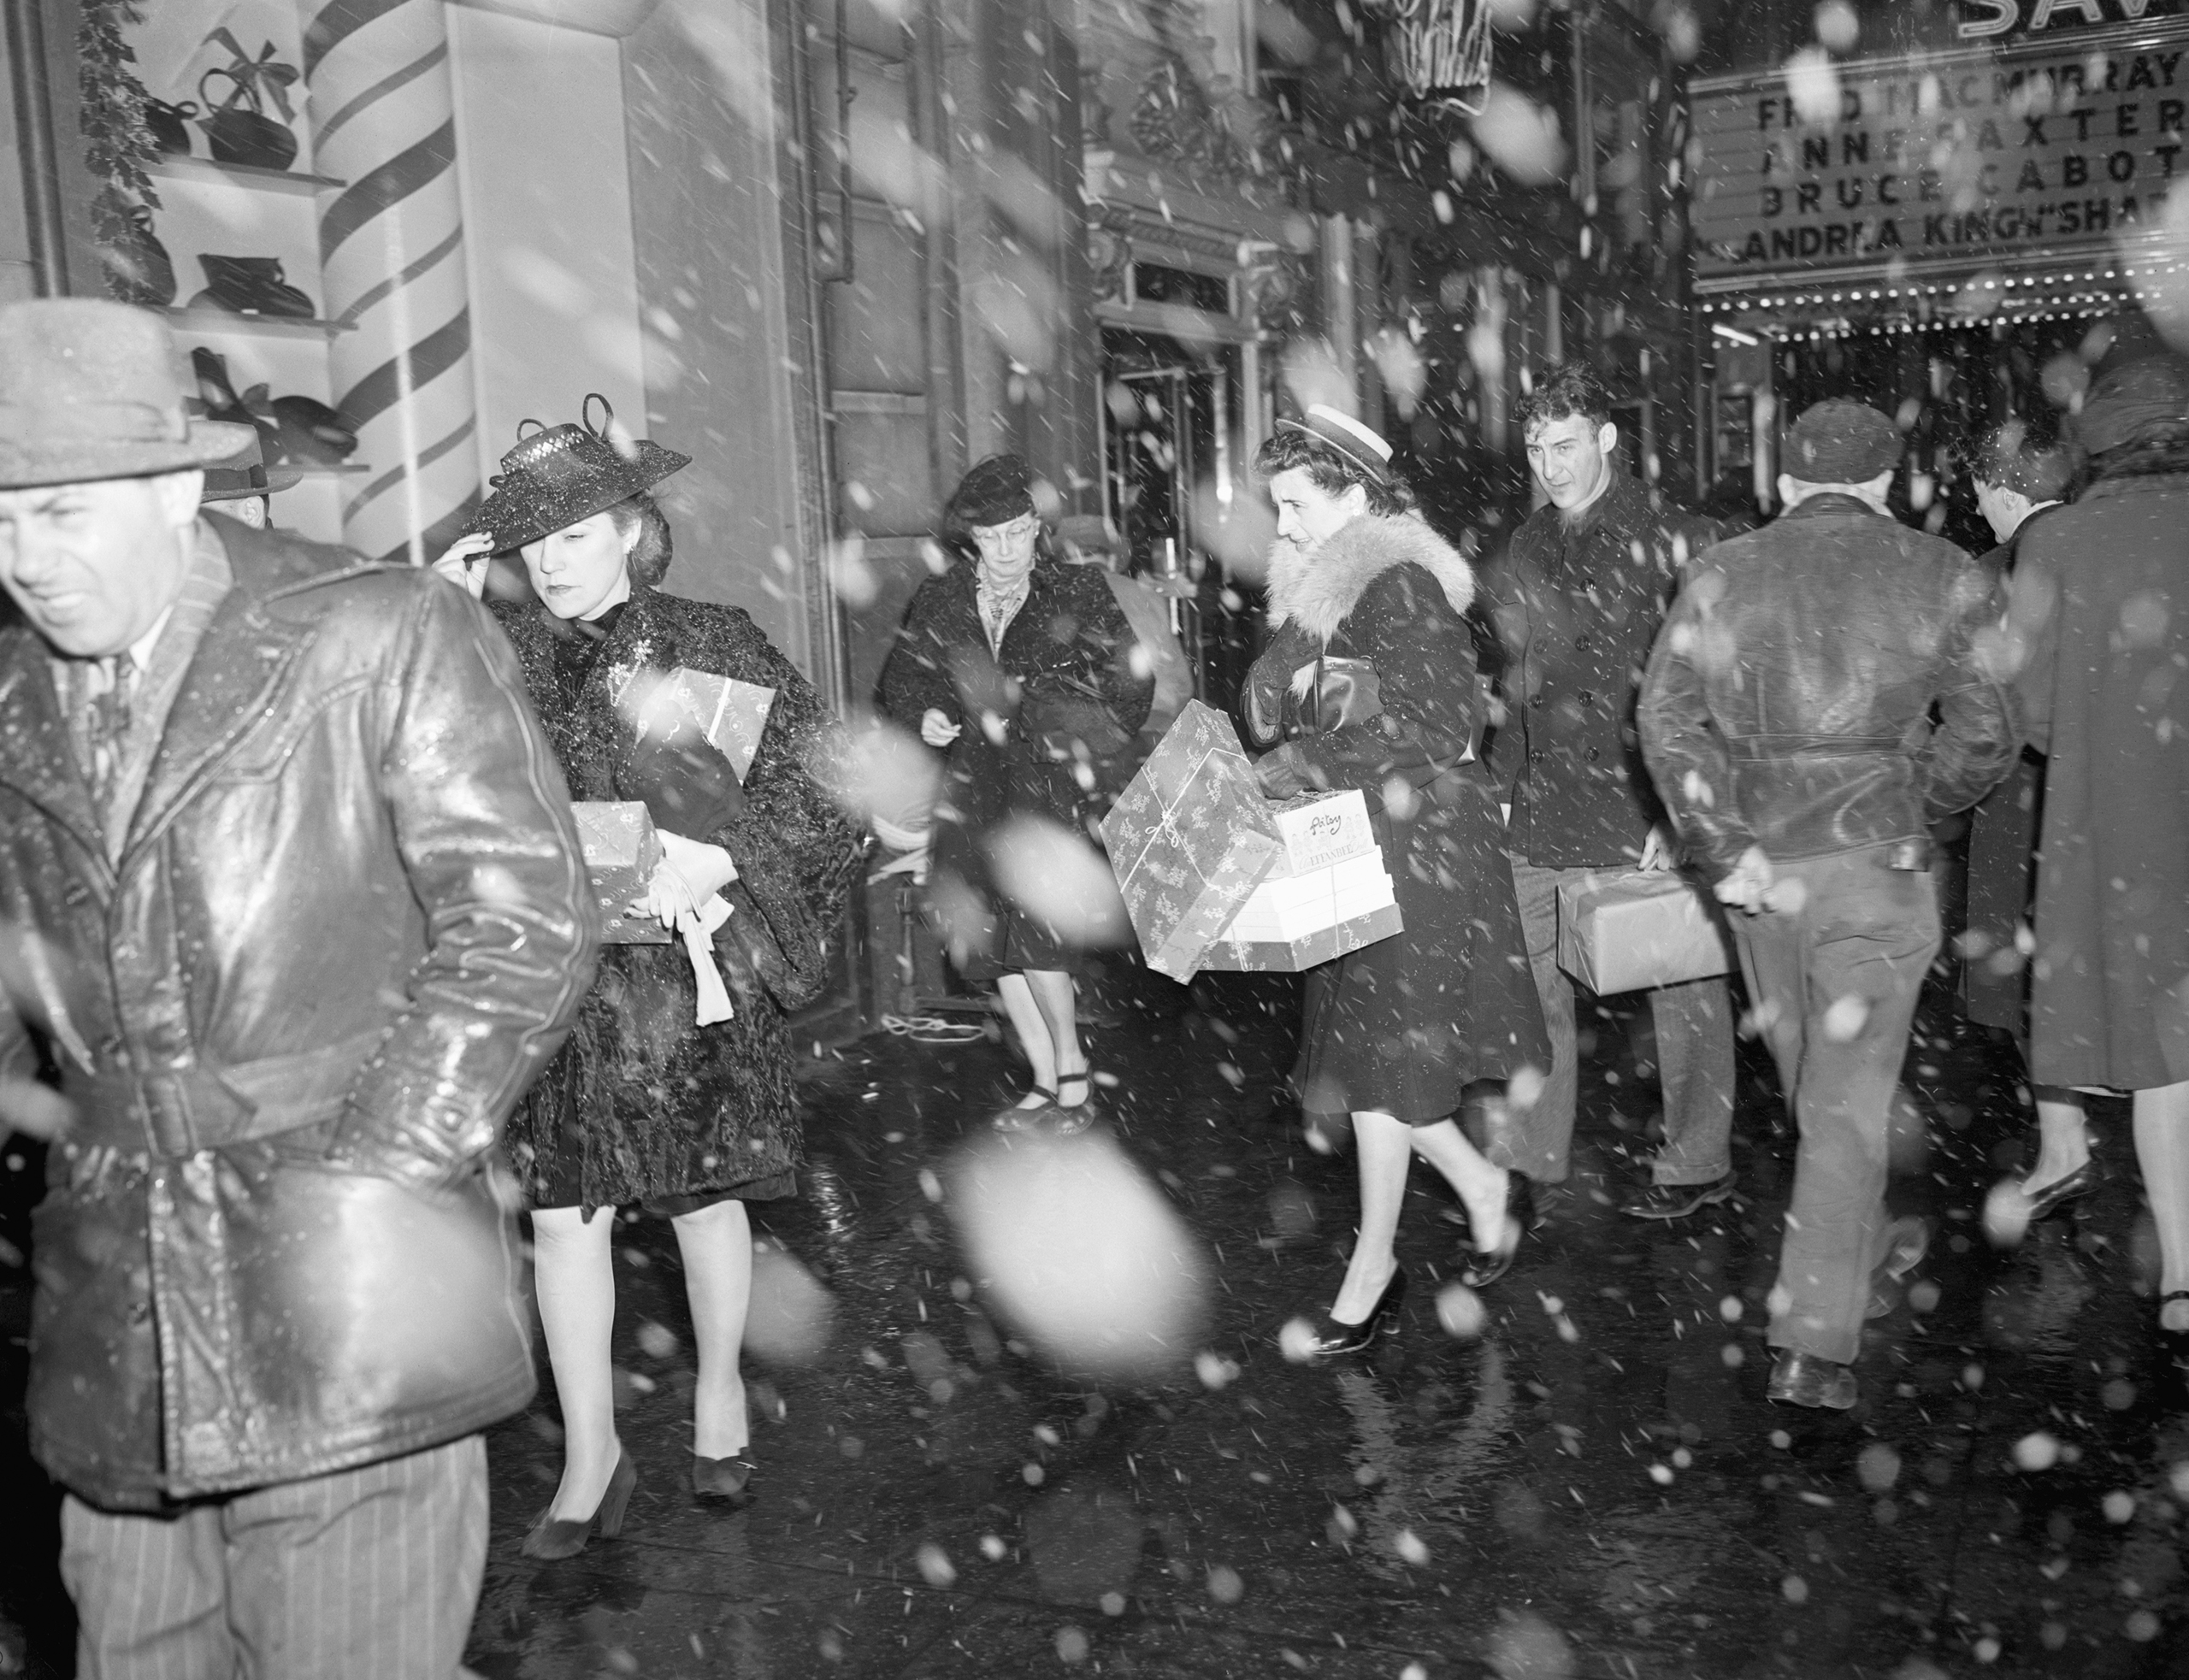 New York City December 20th, 1946. Christmas shoppers on 34th street walk through New York's first real snowfall. Earlier in the day, the weatherman warned of flurries and mentioned the possible white Christmas.